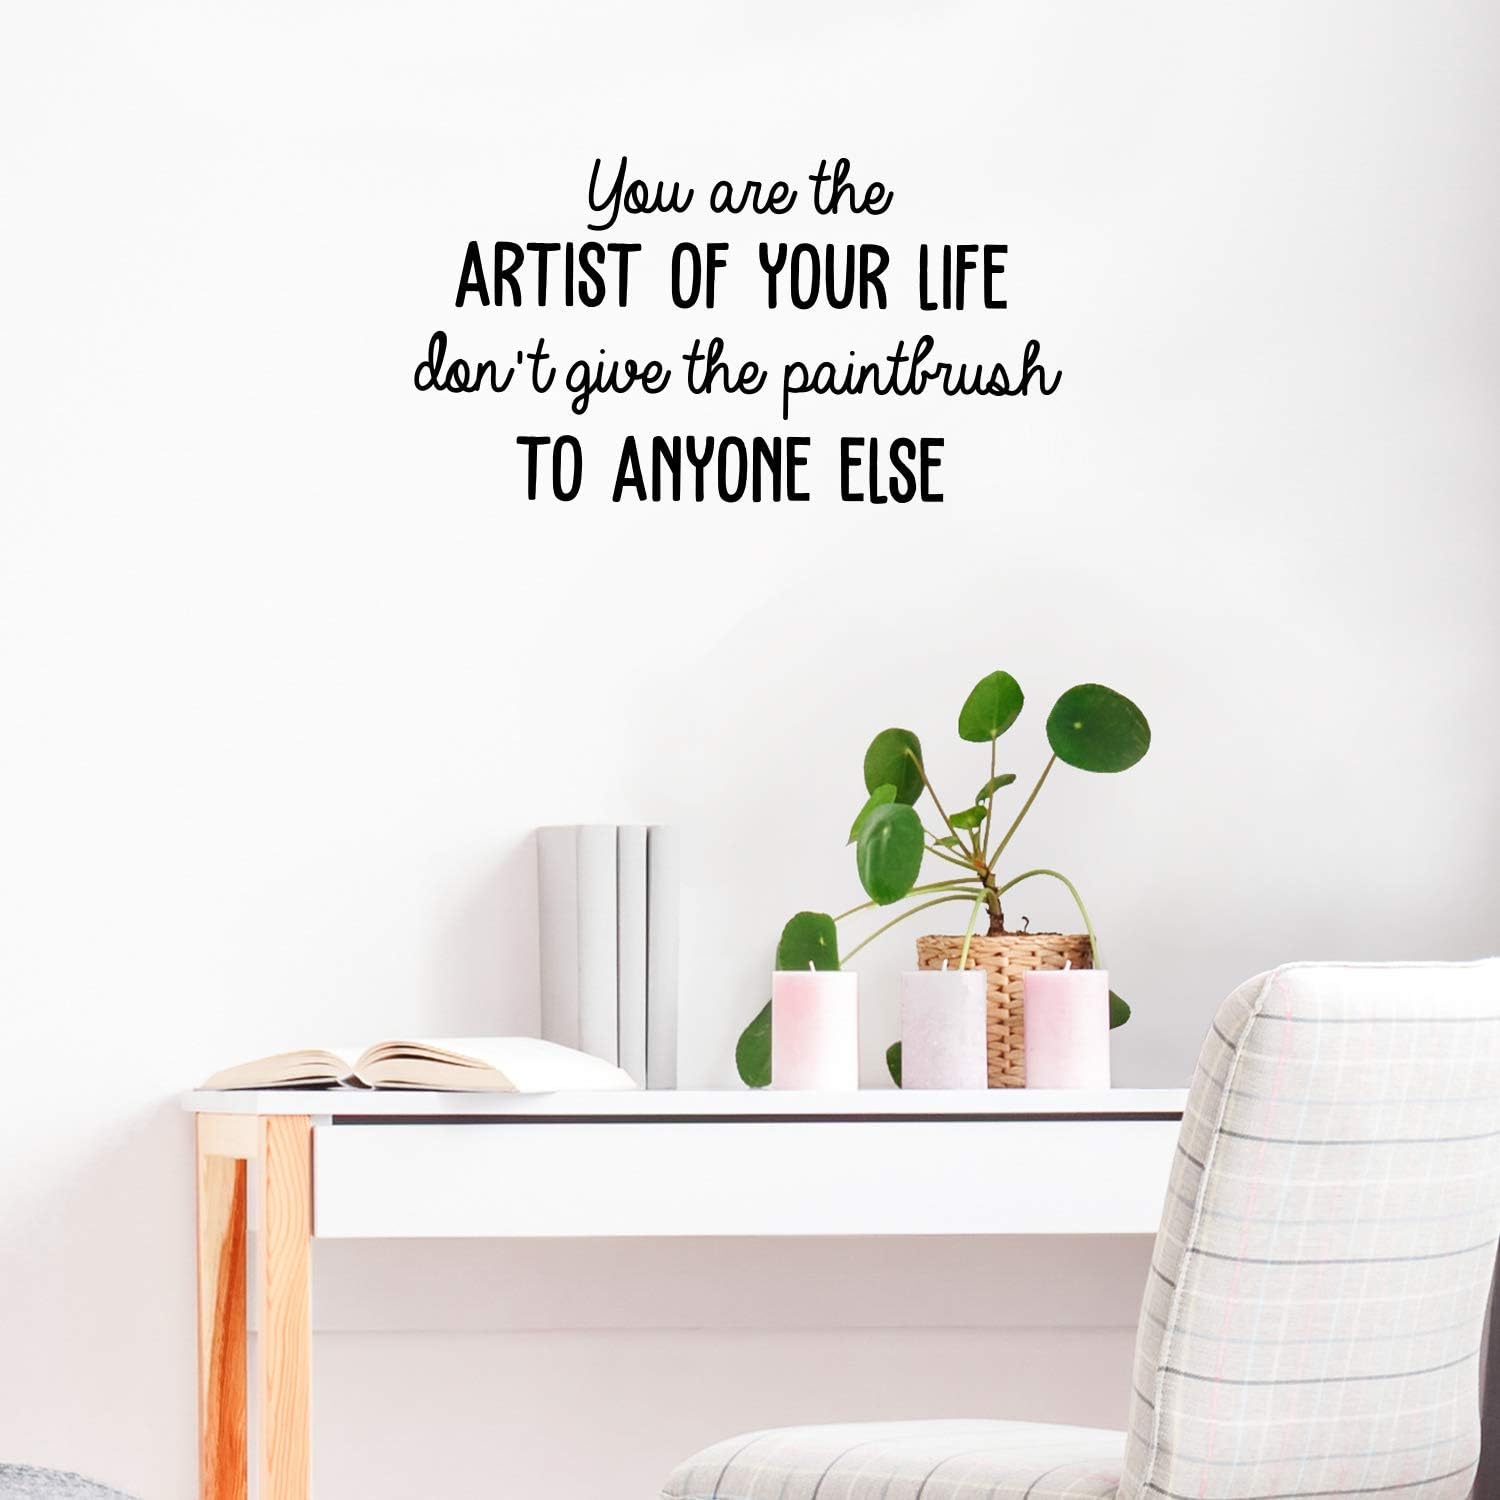 Vinyl Wall Art Decal - You are The Artist of Your Life - 16 x 30 - Modern Inspirational Quote for Home Bedroom Office School Classroom Workplace Decoration Sticker (Black)